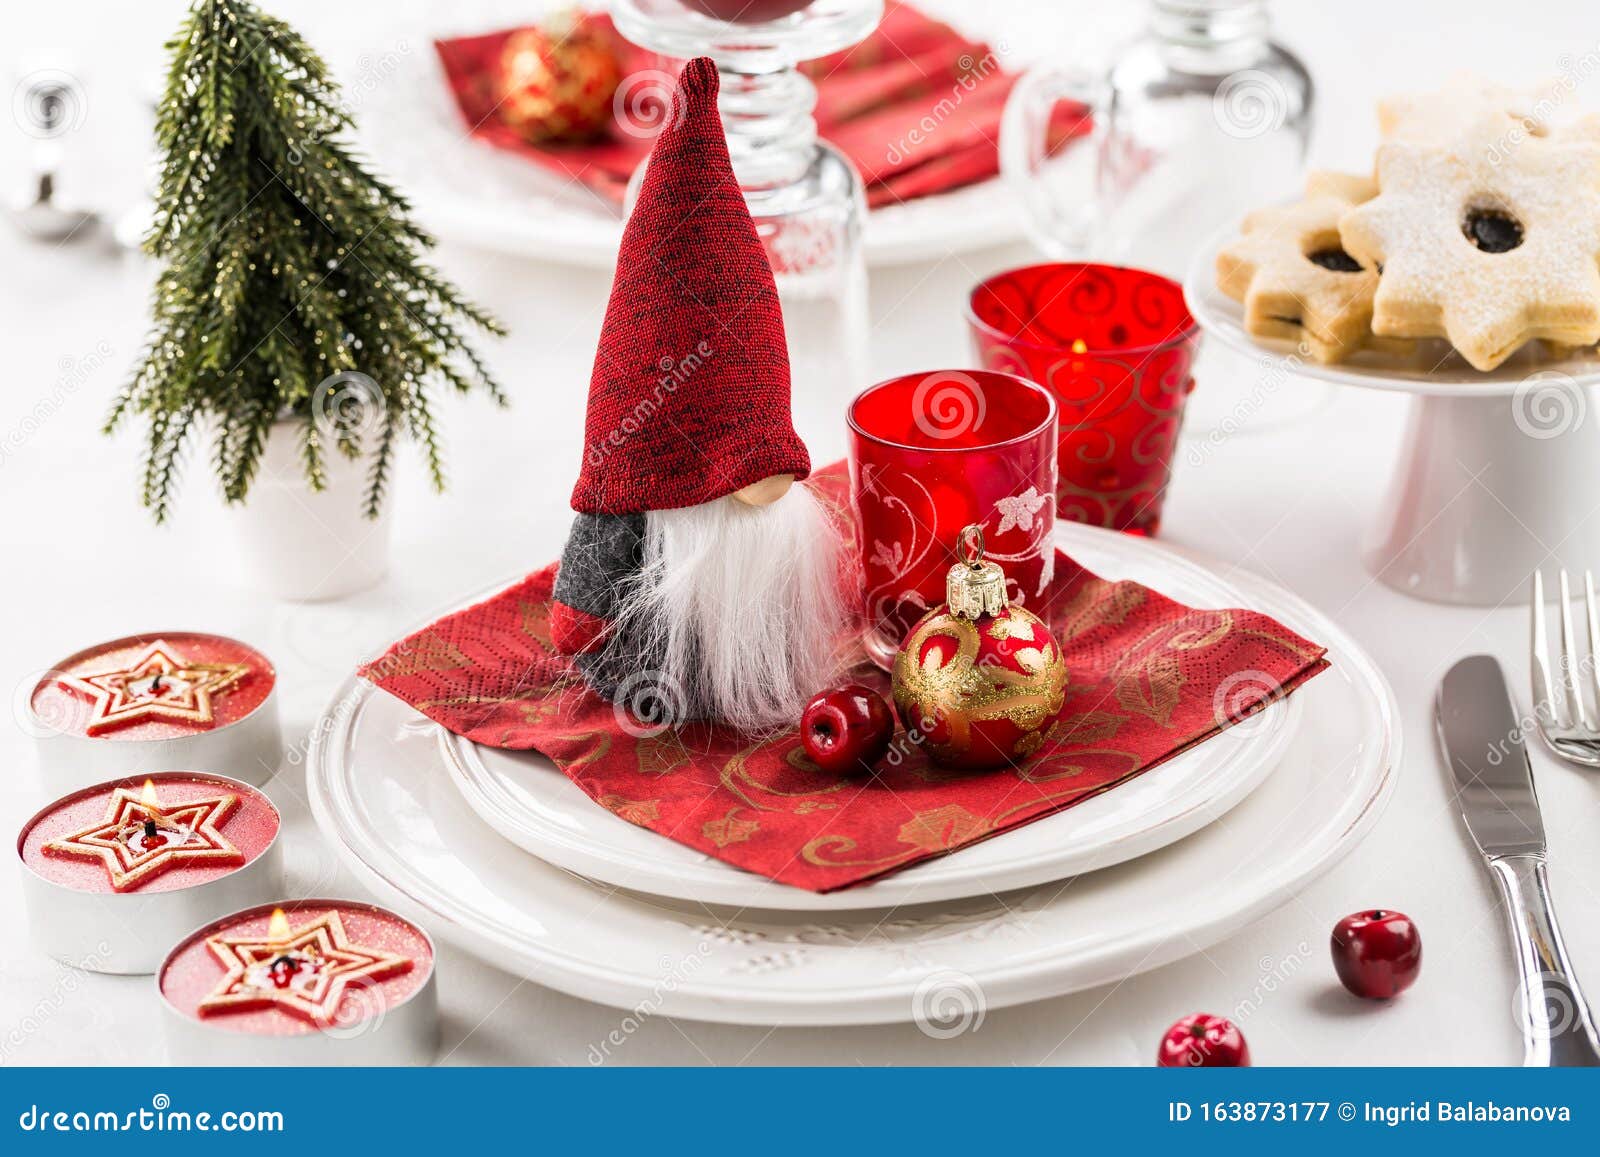 Christmas And New Year Holiday Table Setting Place Setting For Christmas Dinner Holiday Decorations Stock Image Image Of Event